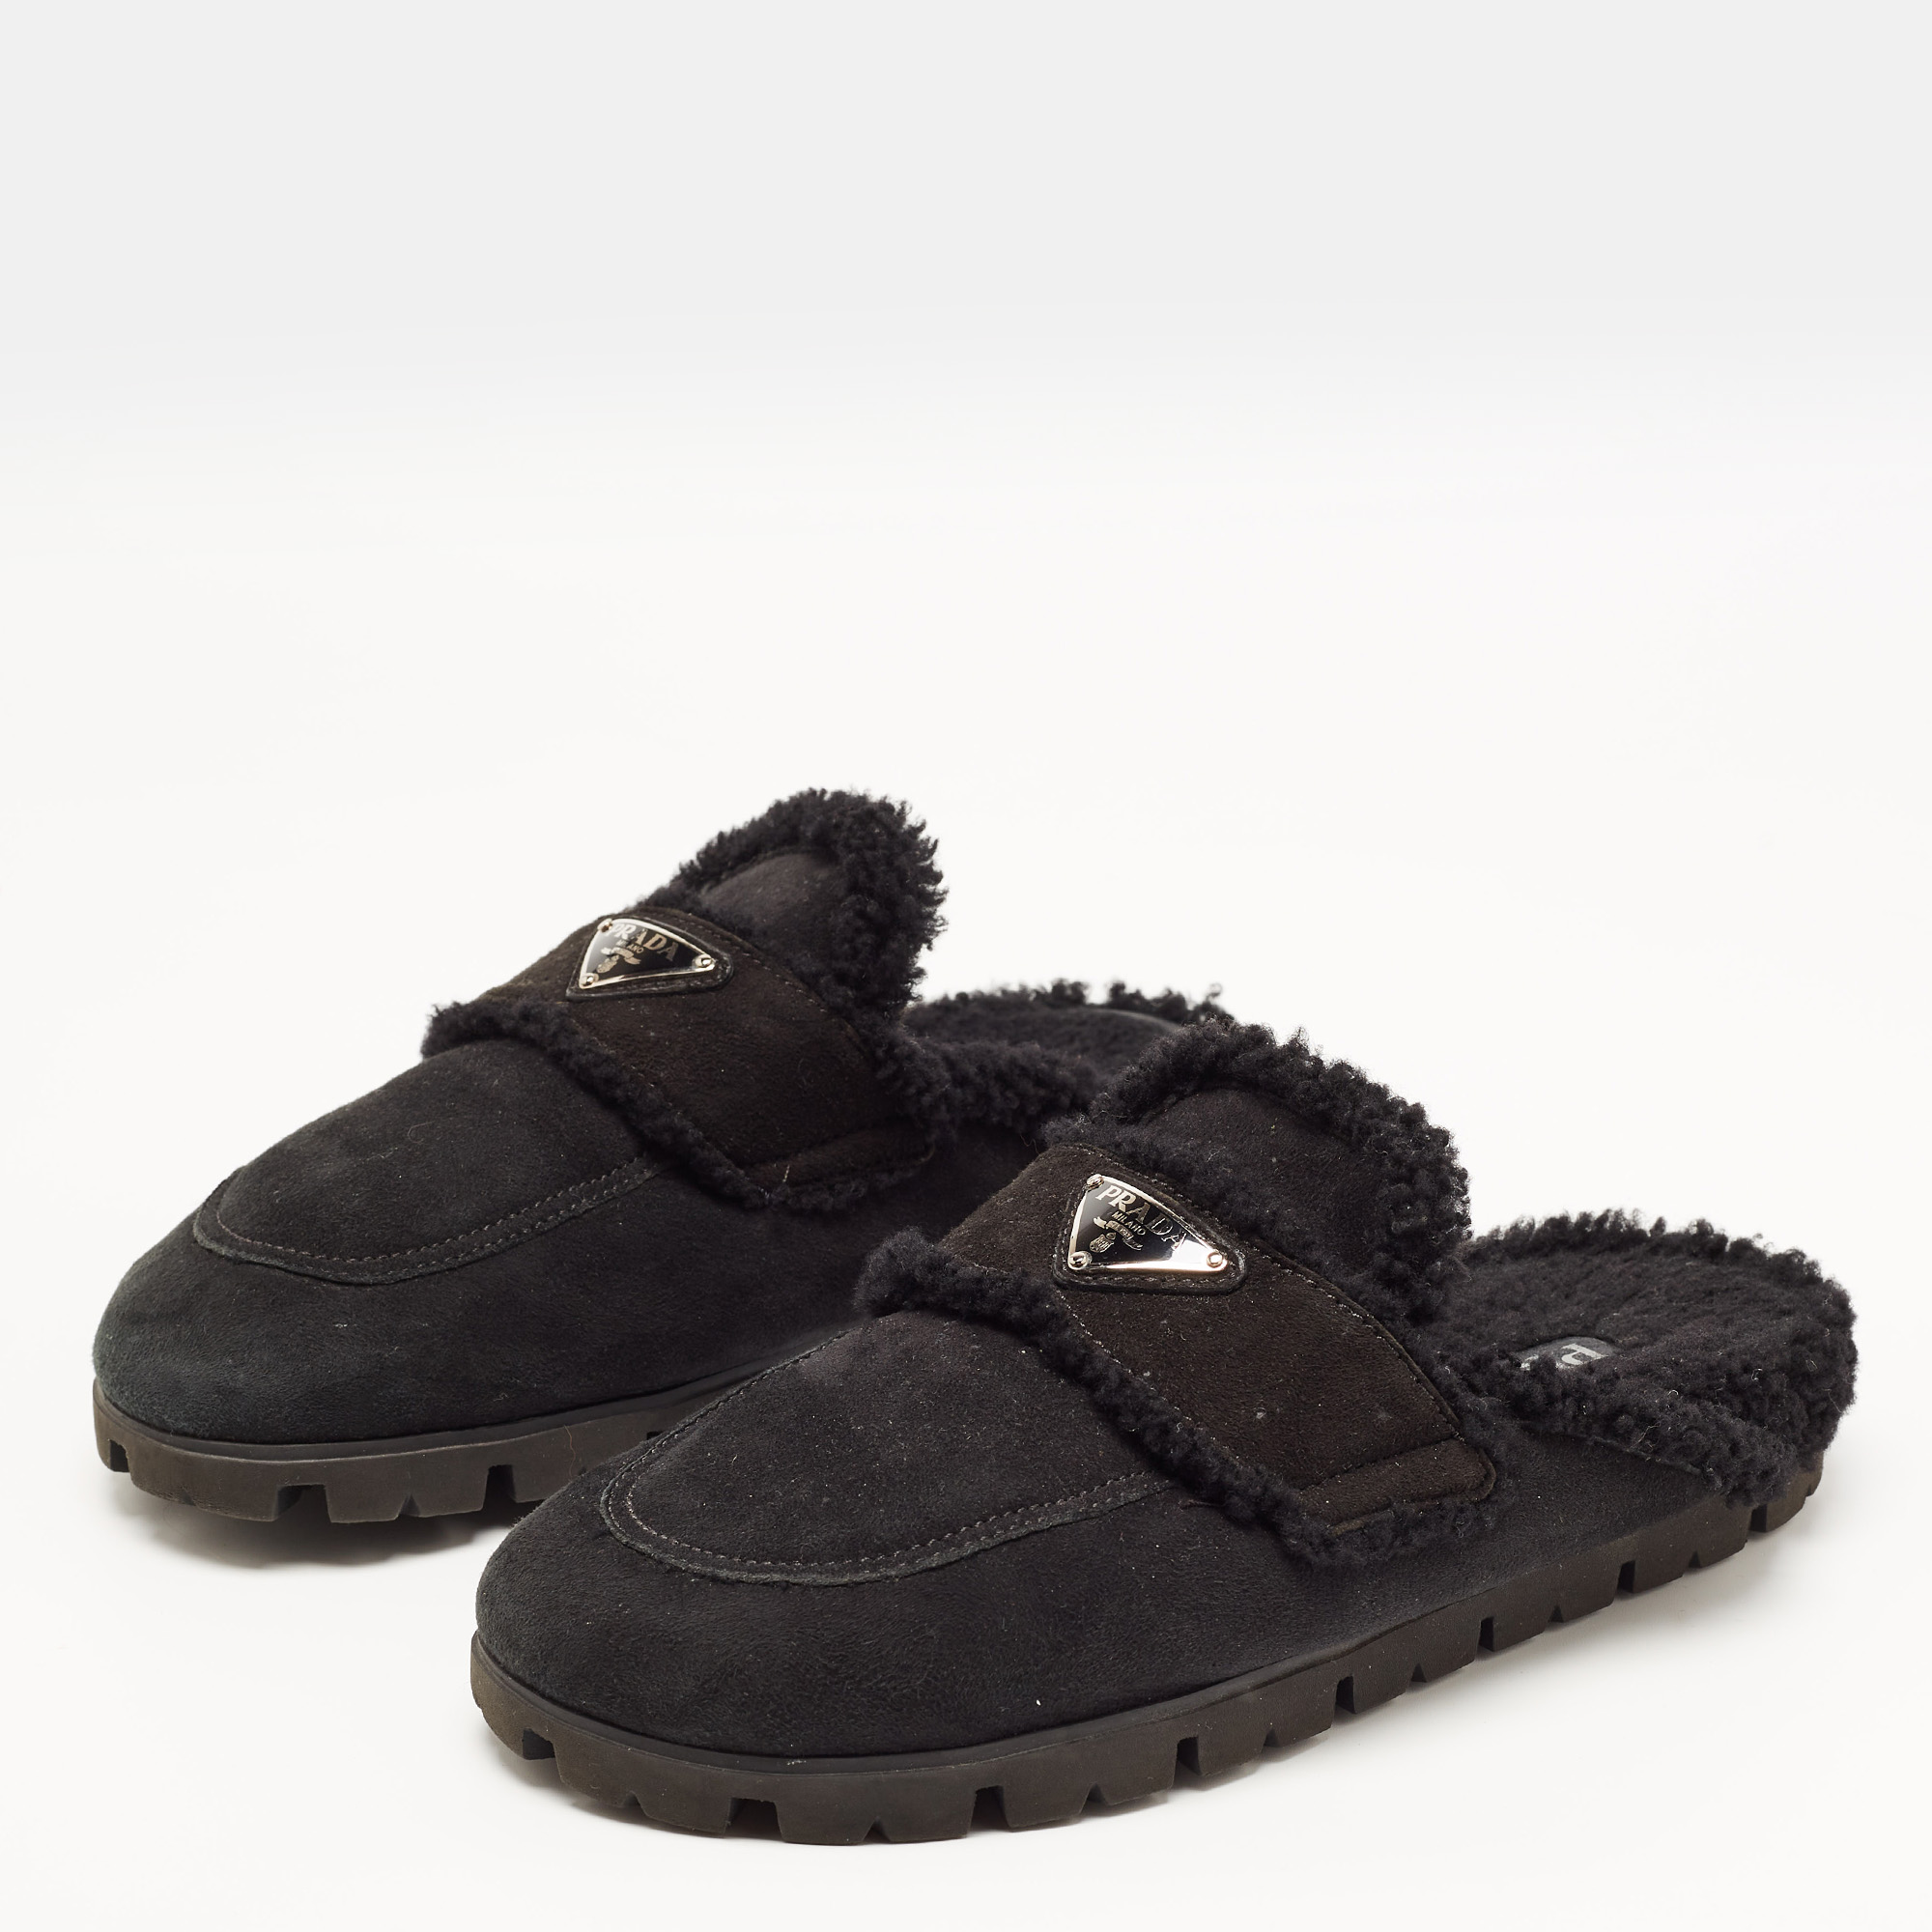 

Prada Black Suede and Shearling Fur Lined Flat Mules Size